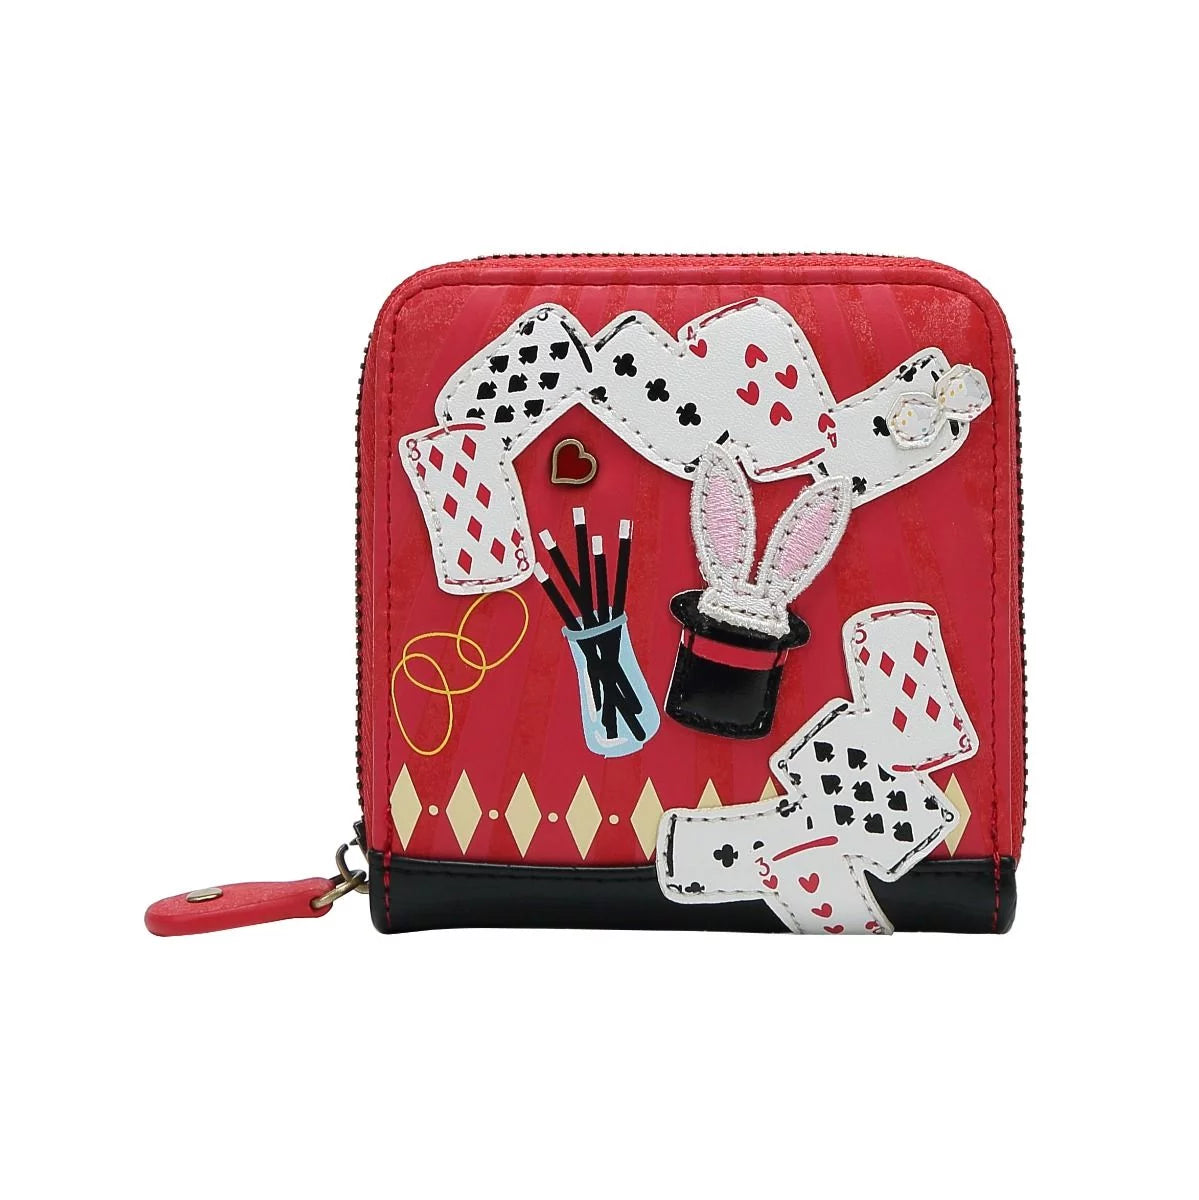 House of Cards Magic Shop Square Wallet